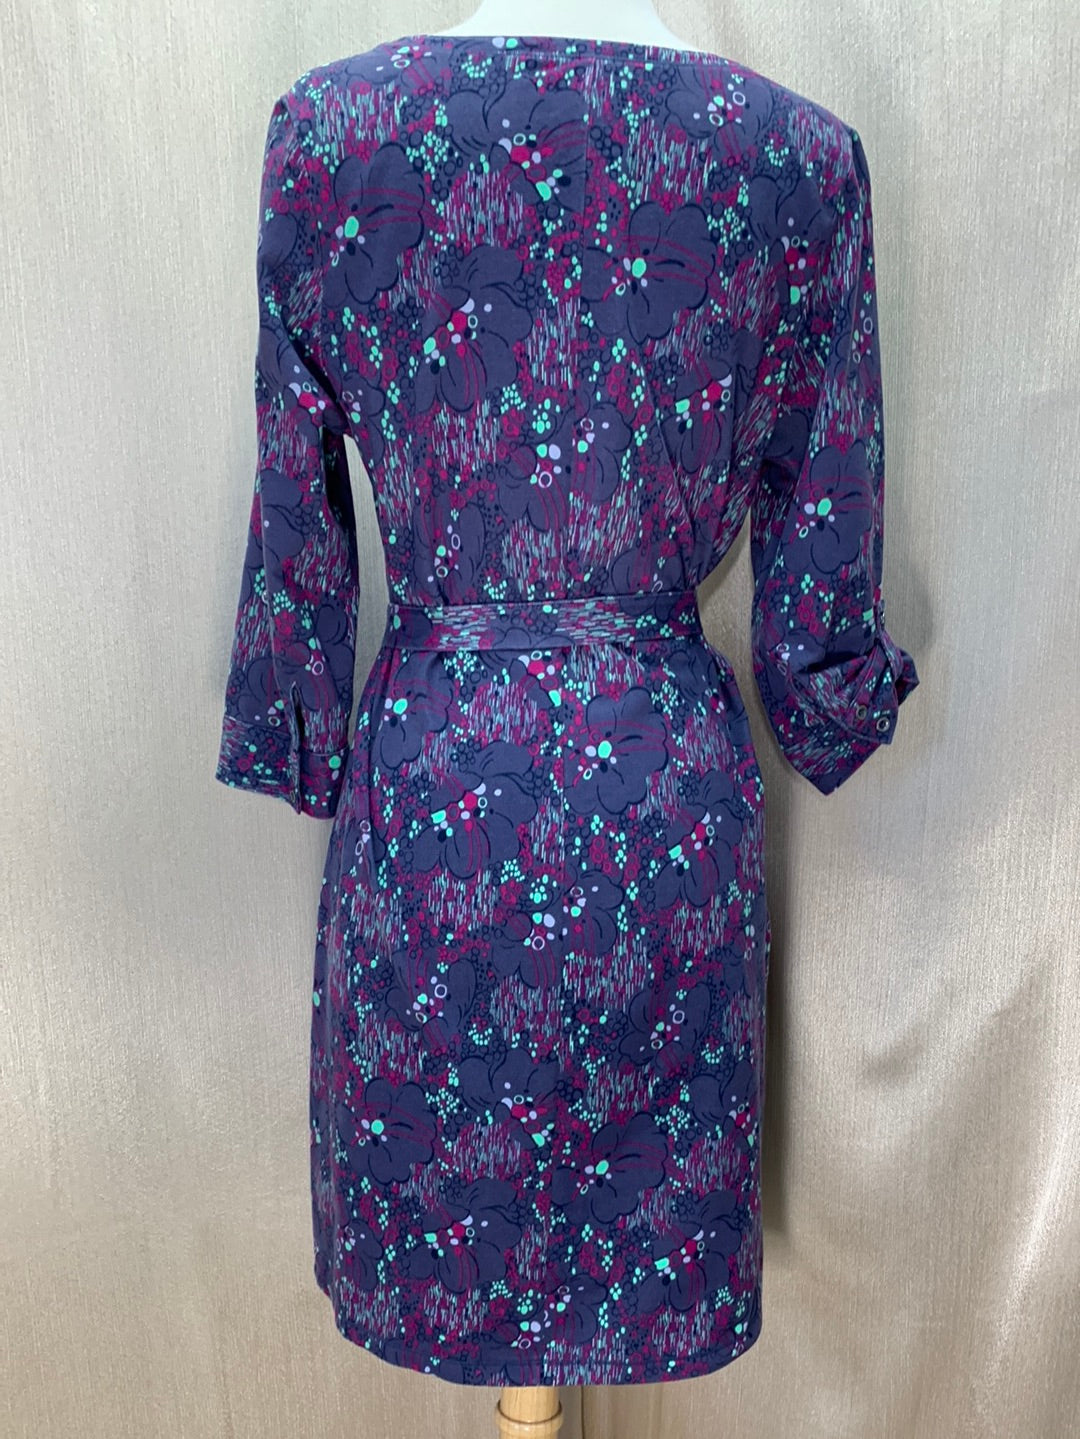 REI purple floral Henley Neck Belted 3/4 Tab Sleeve Casual Dress - M